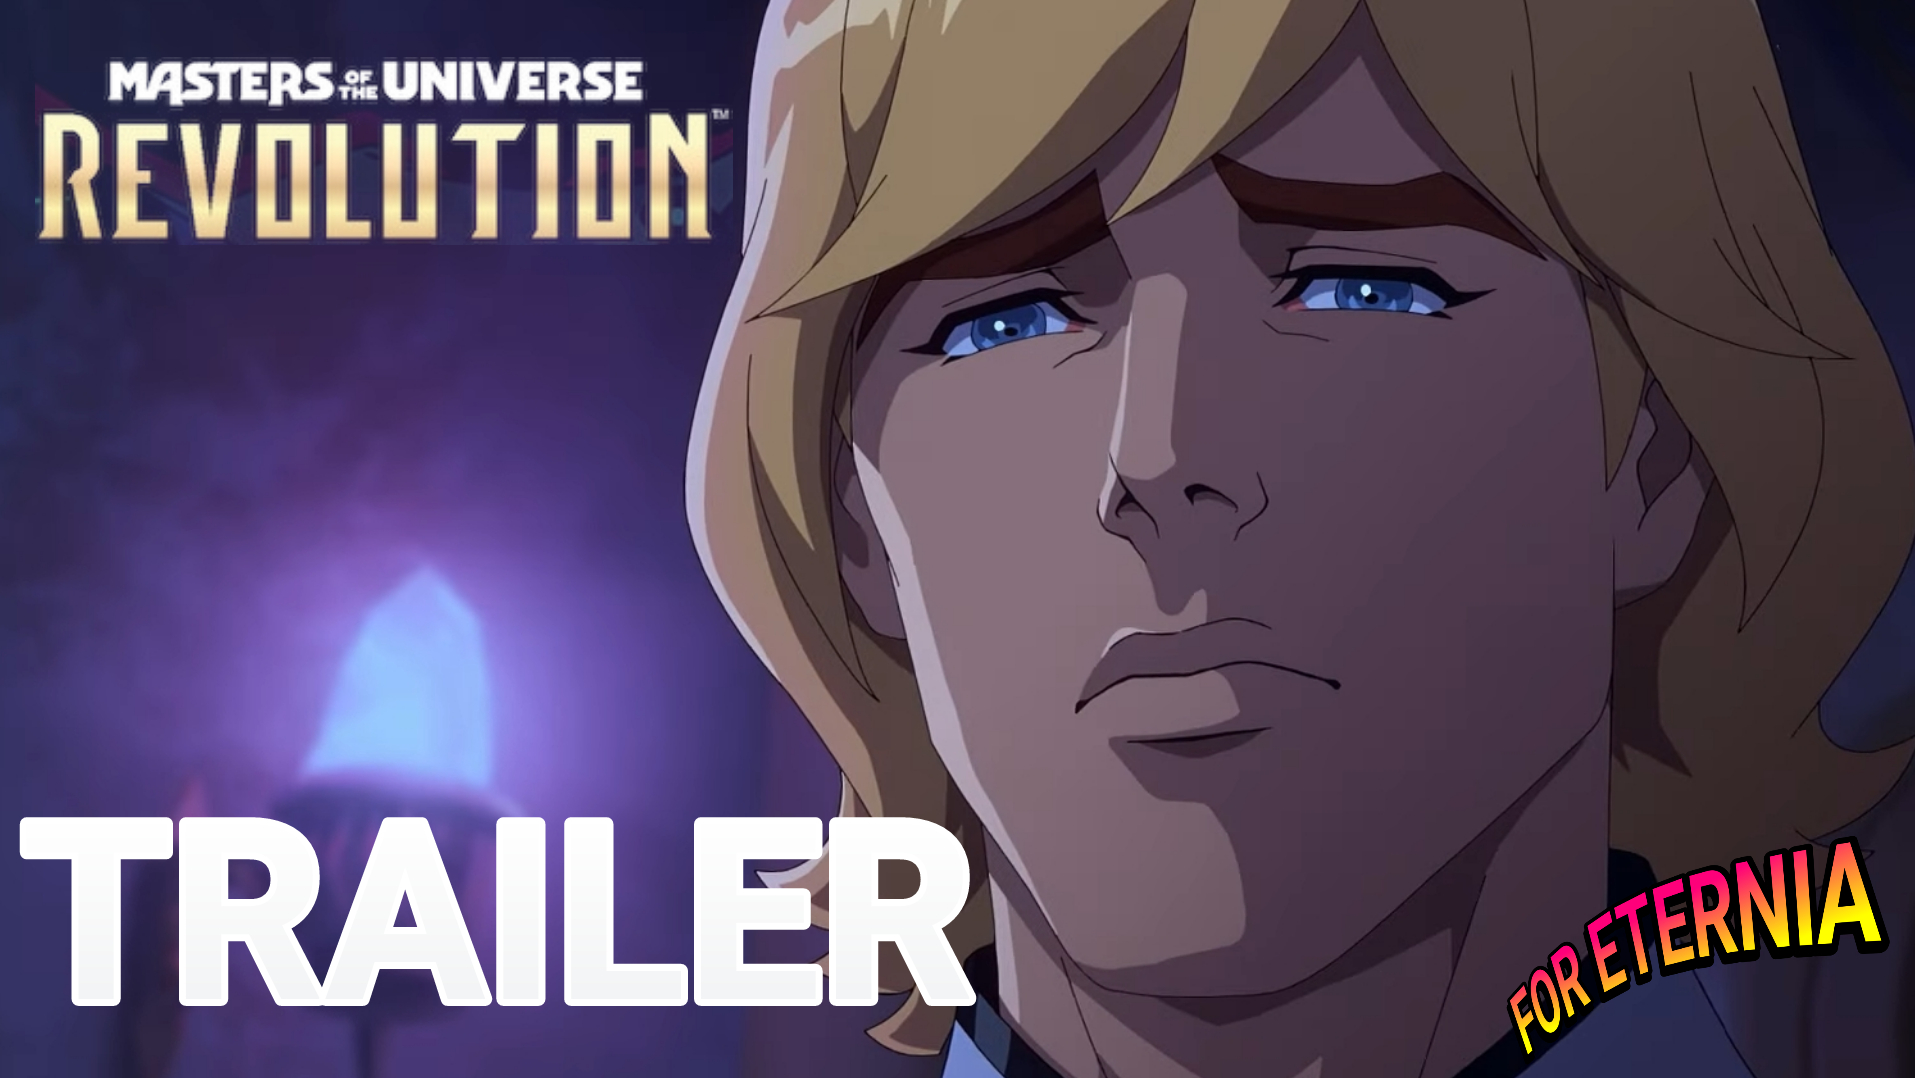 AT LAST! The Trailer for ”Masters of the Universe: Revolution” has Arrived!